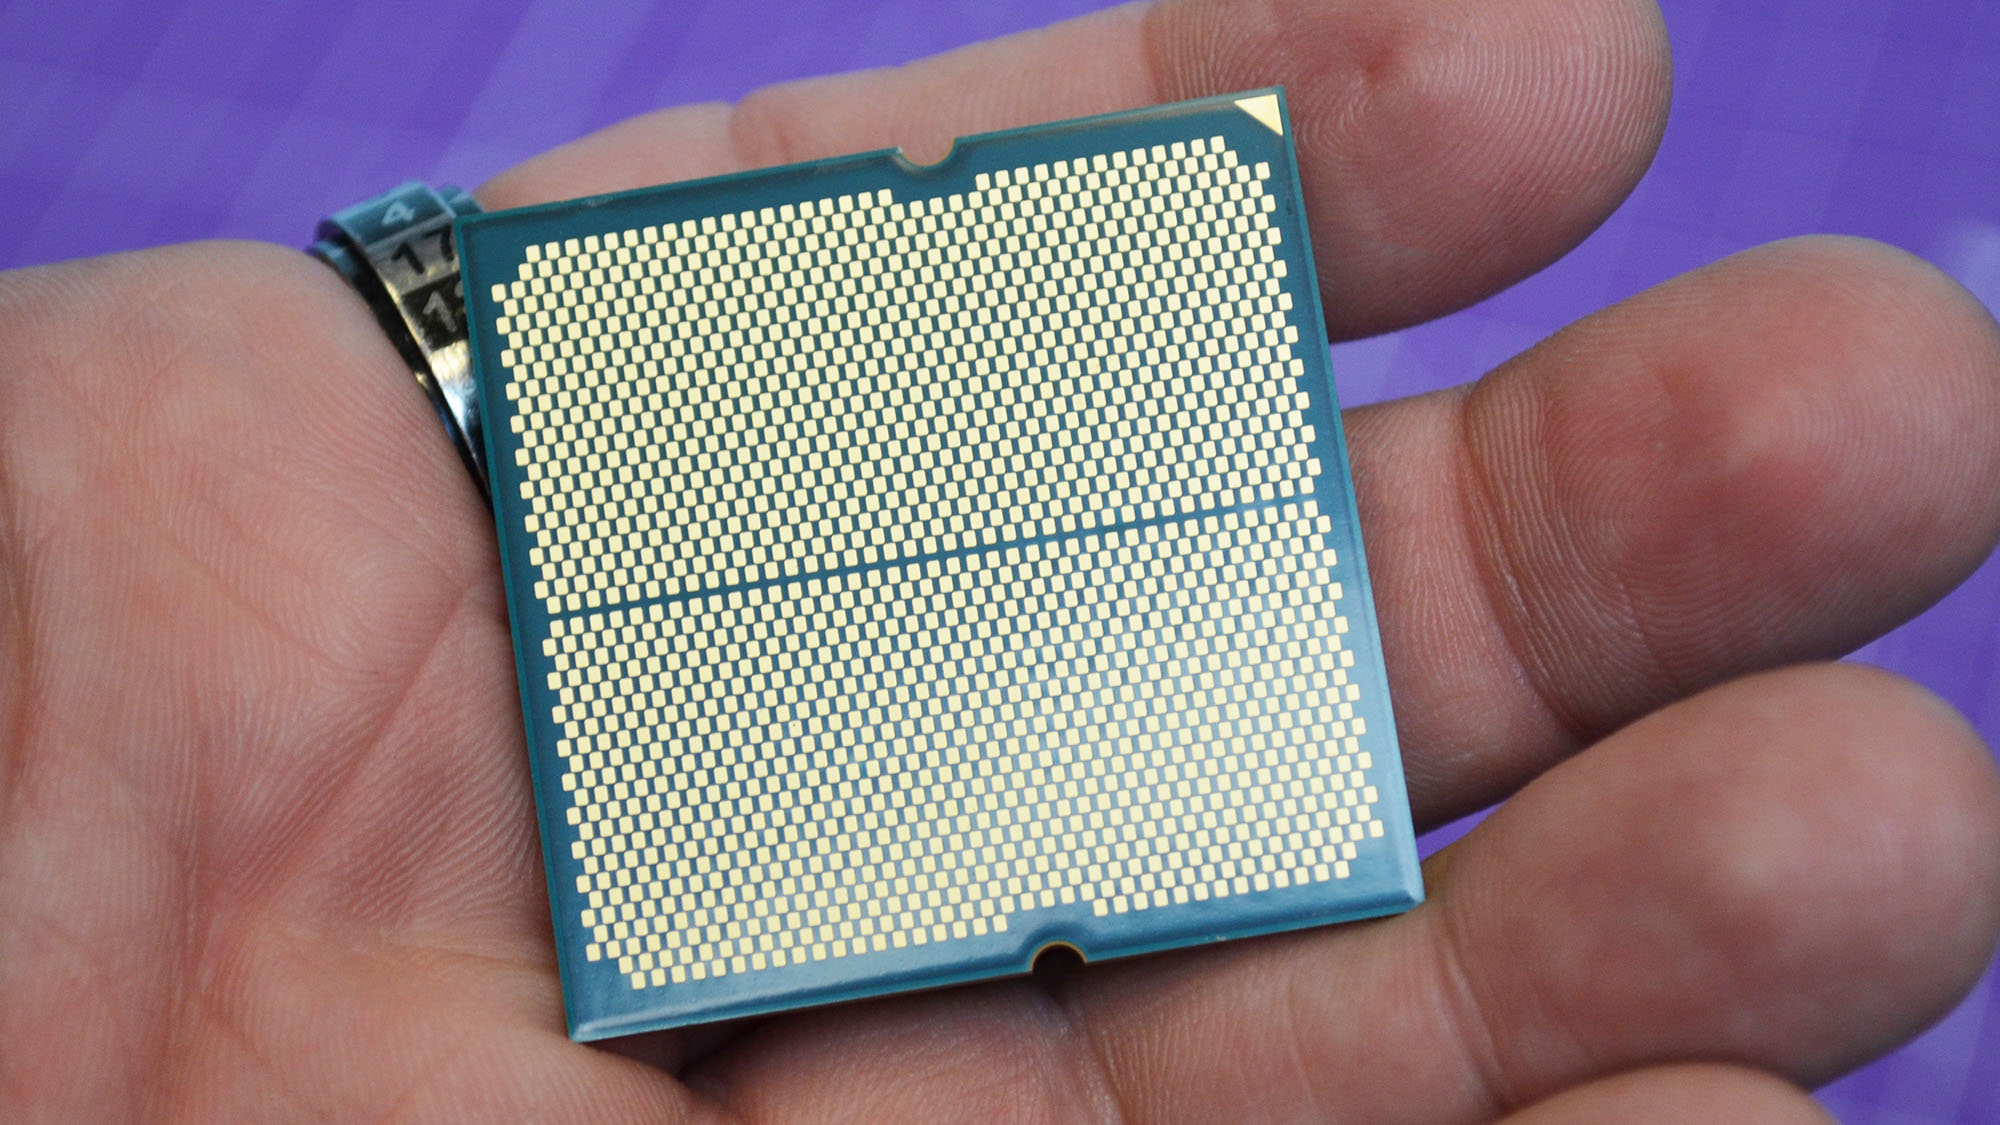 amd-admits-ryzen-9000-cpus-won’t-steal-the-gaming-crown-–-is-this-why-3d-v-cache-chips-might-be-coming-early?